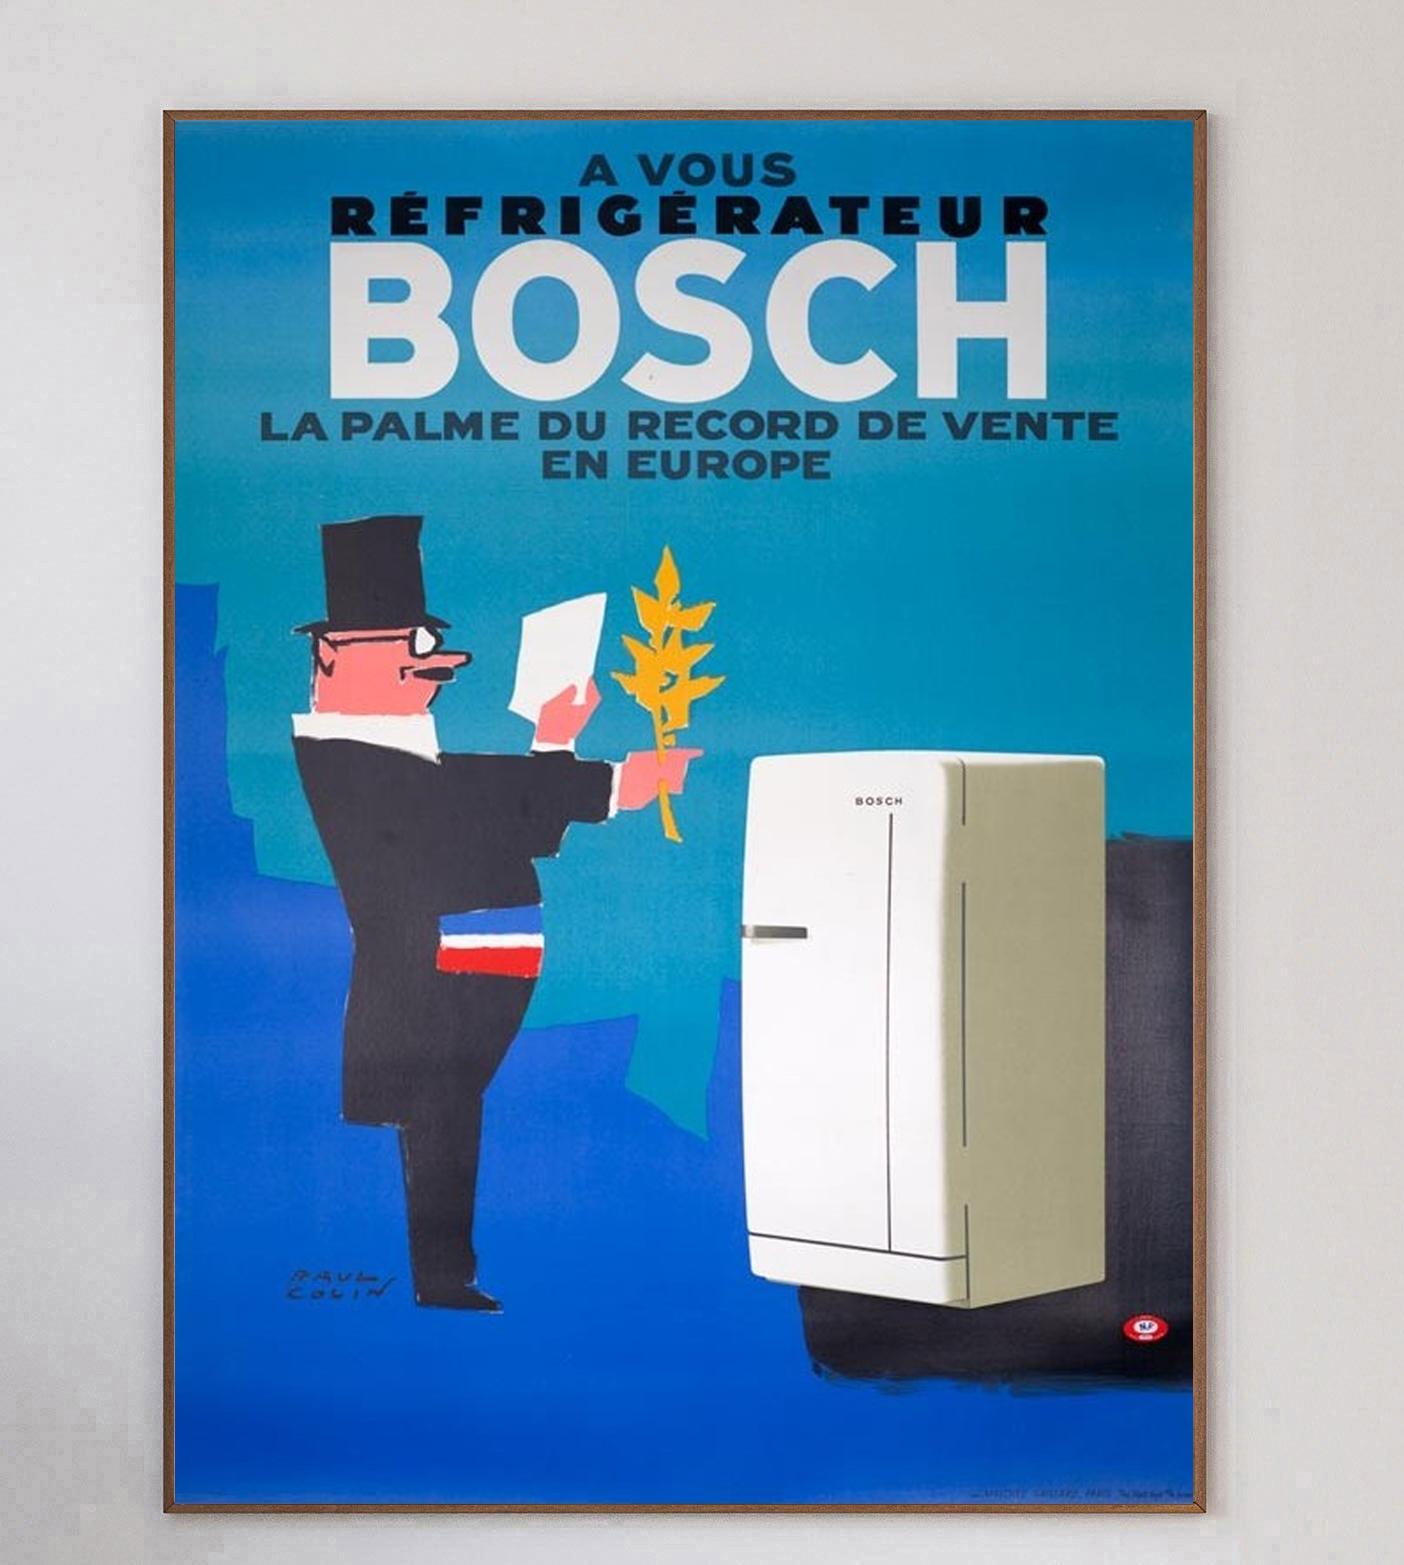 Gorgeous Art Deco poster from 1963 for German electronics brand Bosch. Advertising their new line of refrigerators, the poster reads 